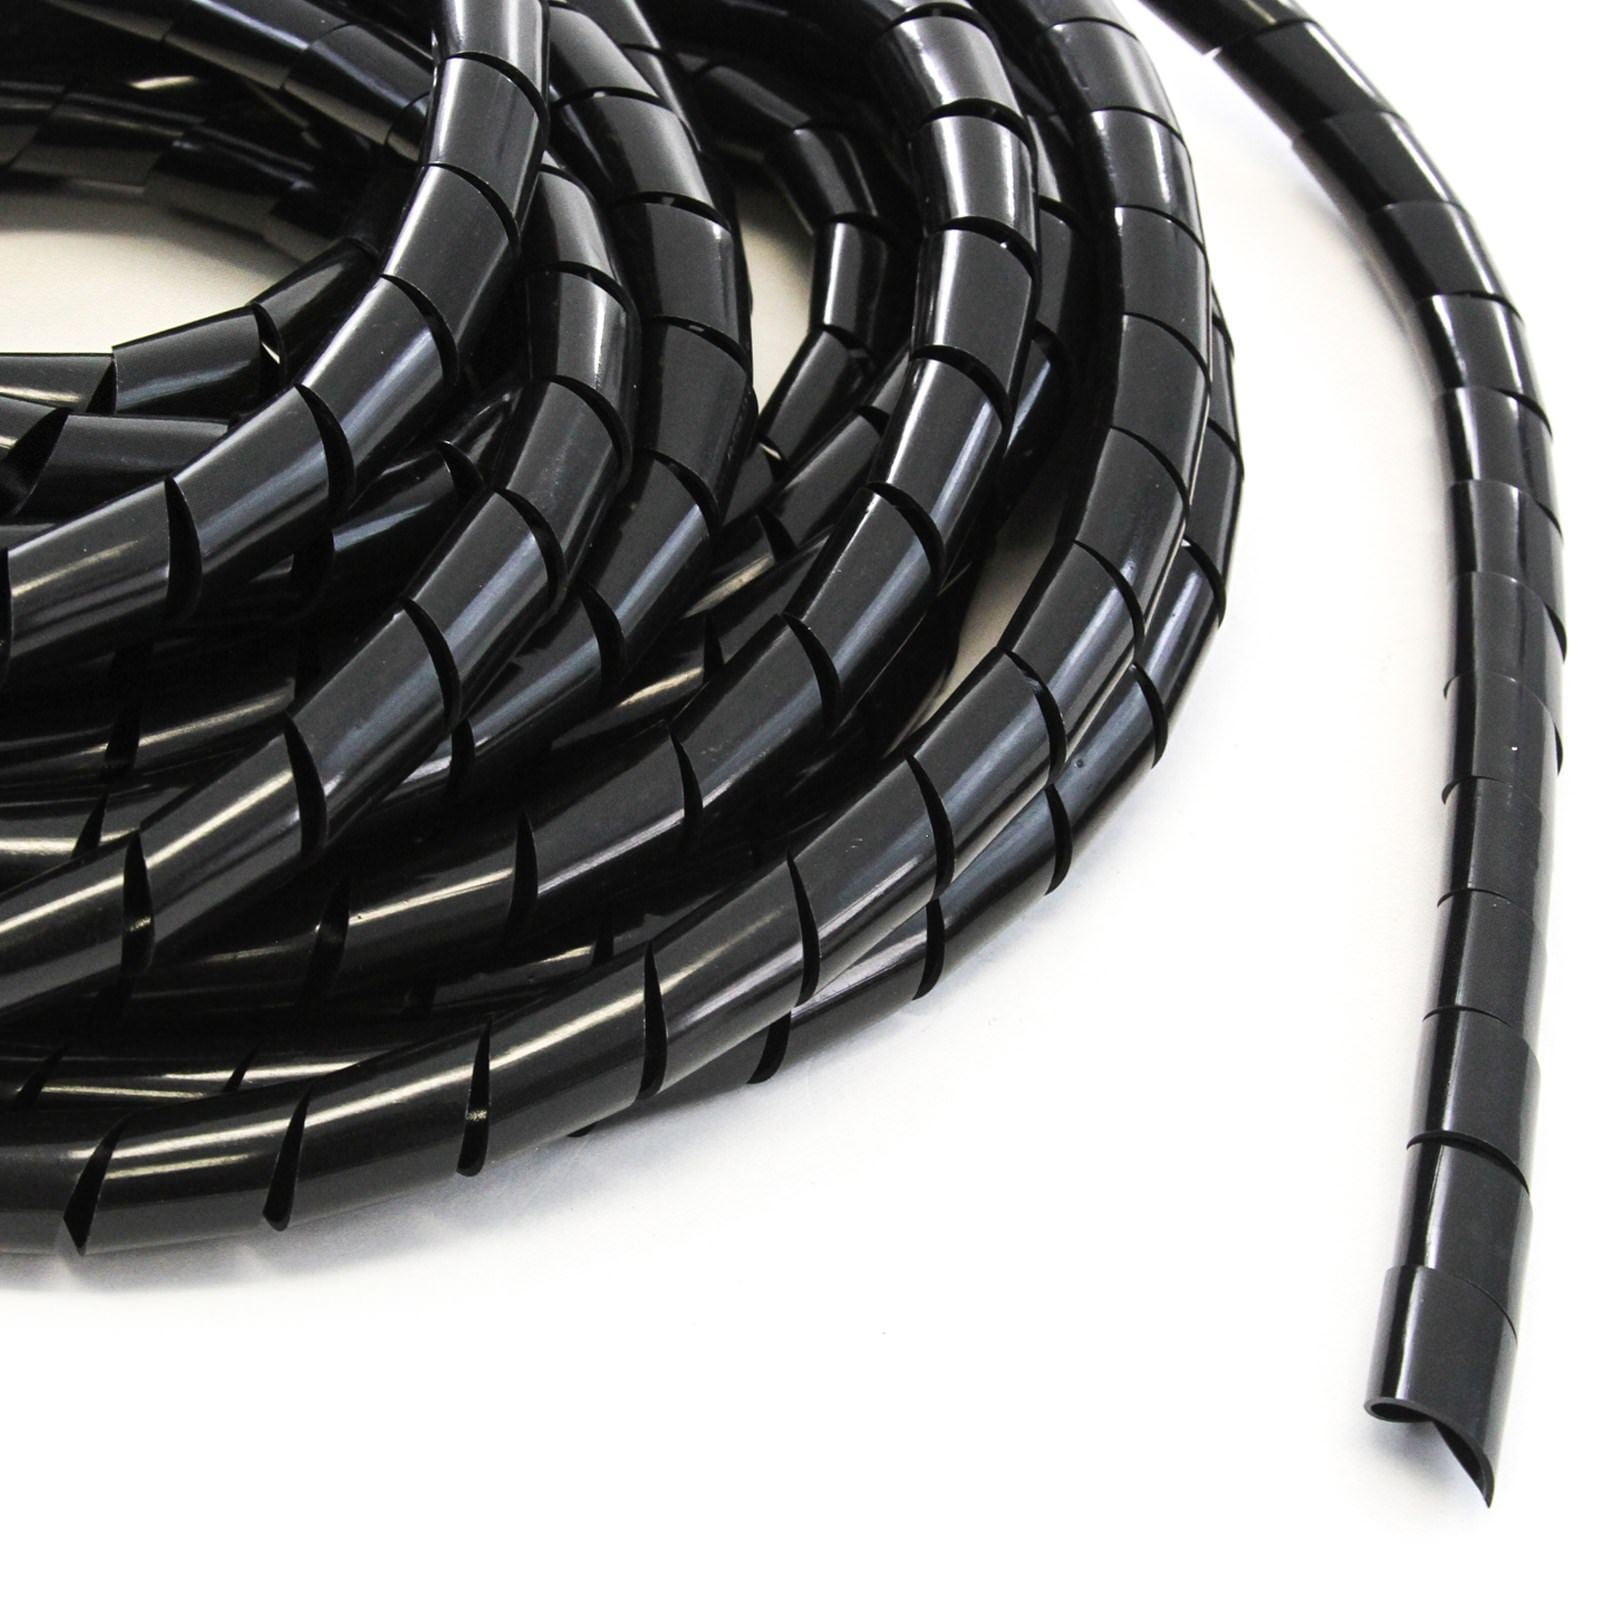 5/16 inch-Spiral-Cable-Wire-Wrap-Tube Harness-Black-Full 25 Foot Rolls 